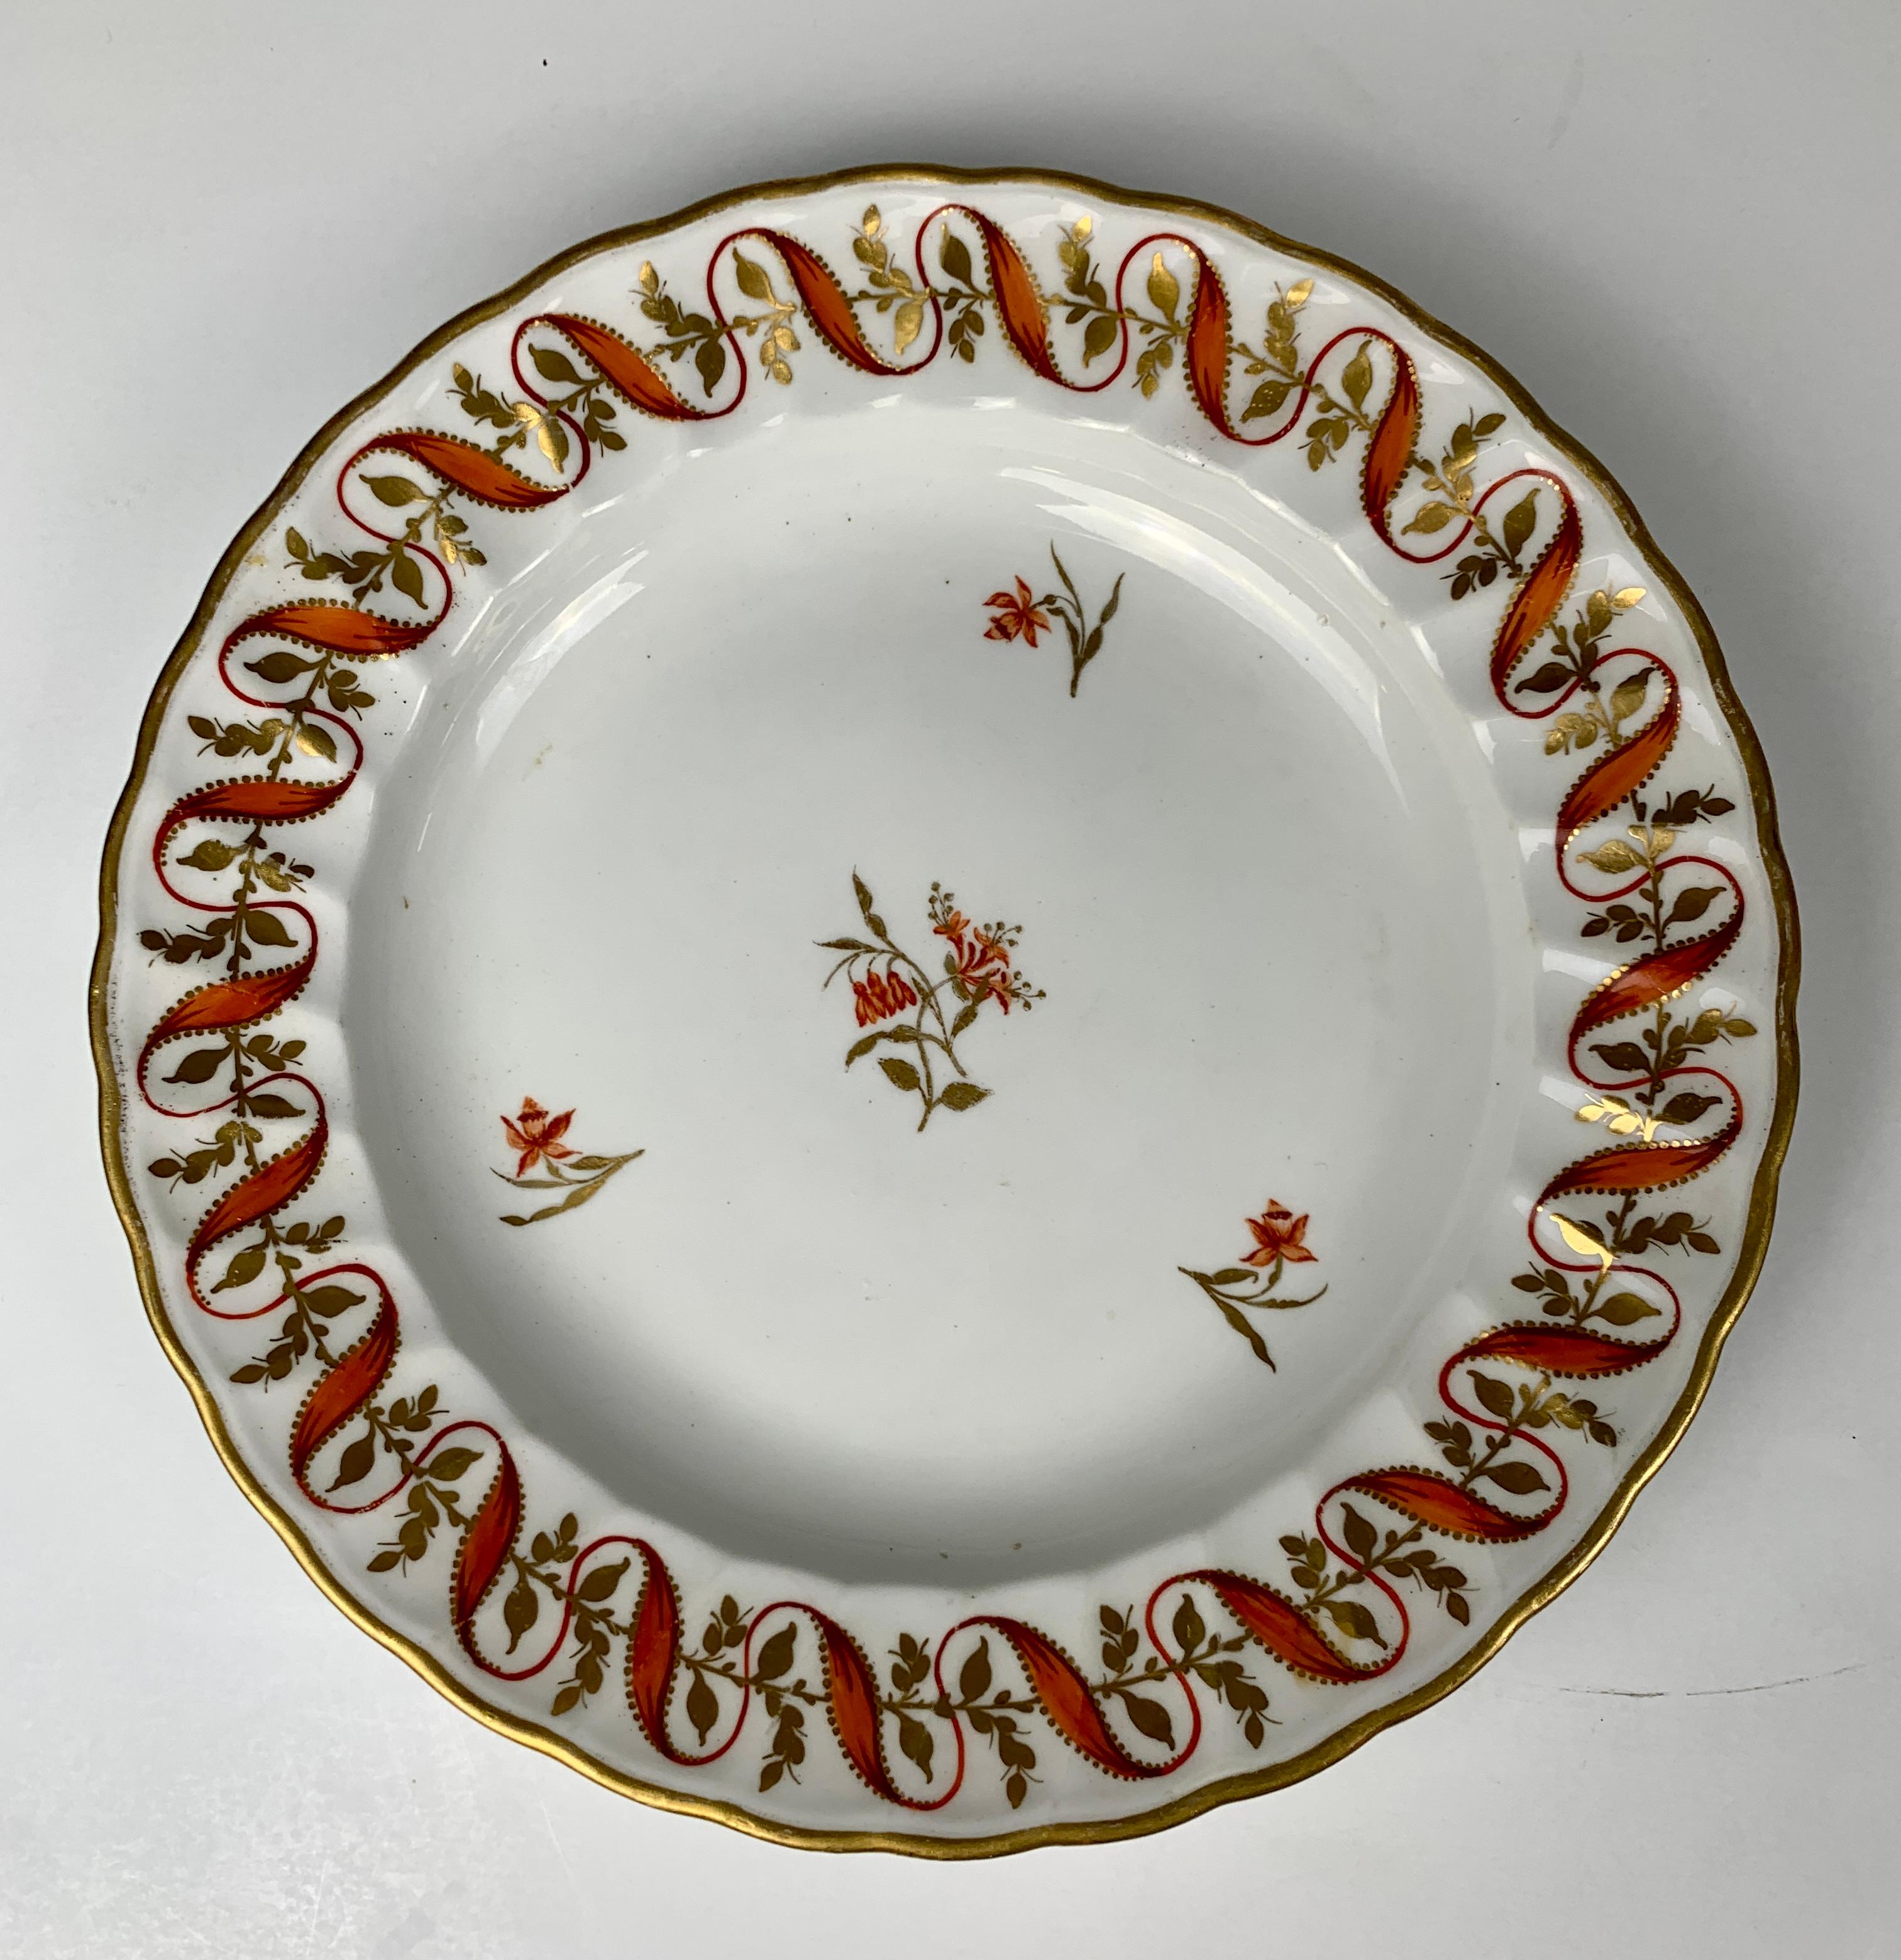 English Set Four Antique Porcelain Dishes Hand-Painted 18th Century England, circa 1790 For Sale